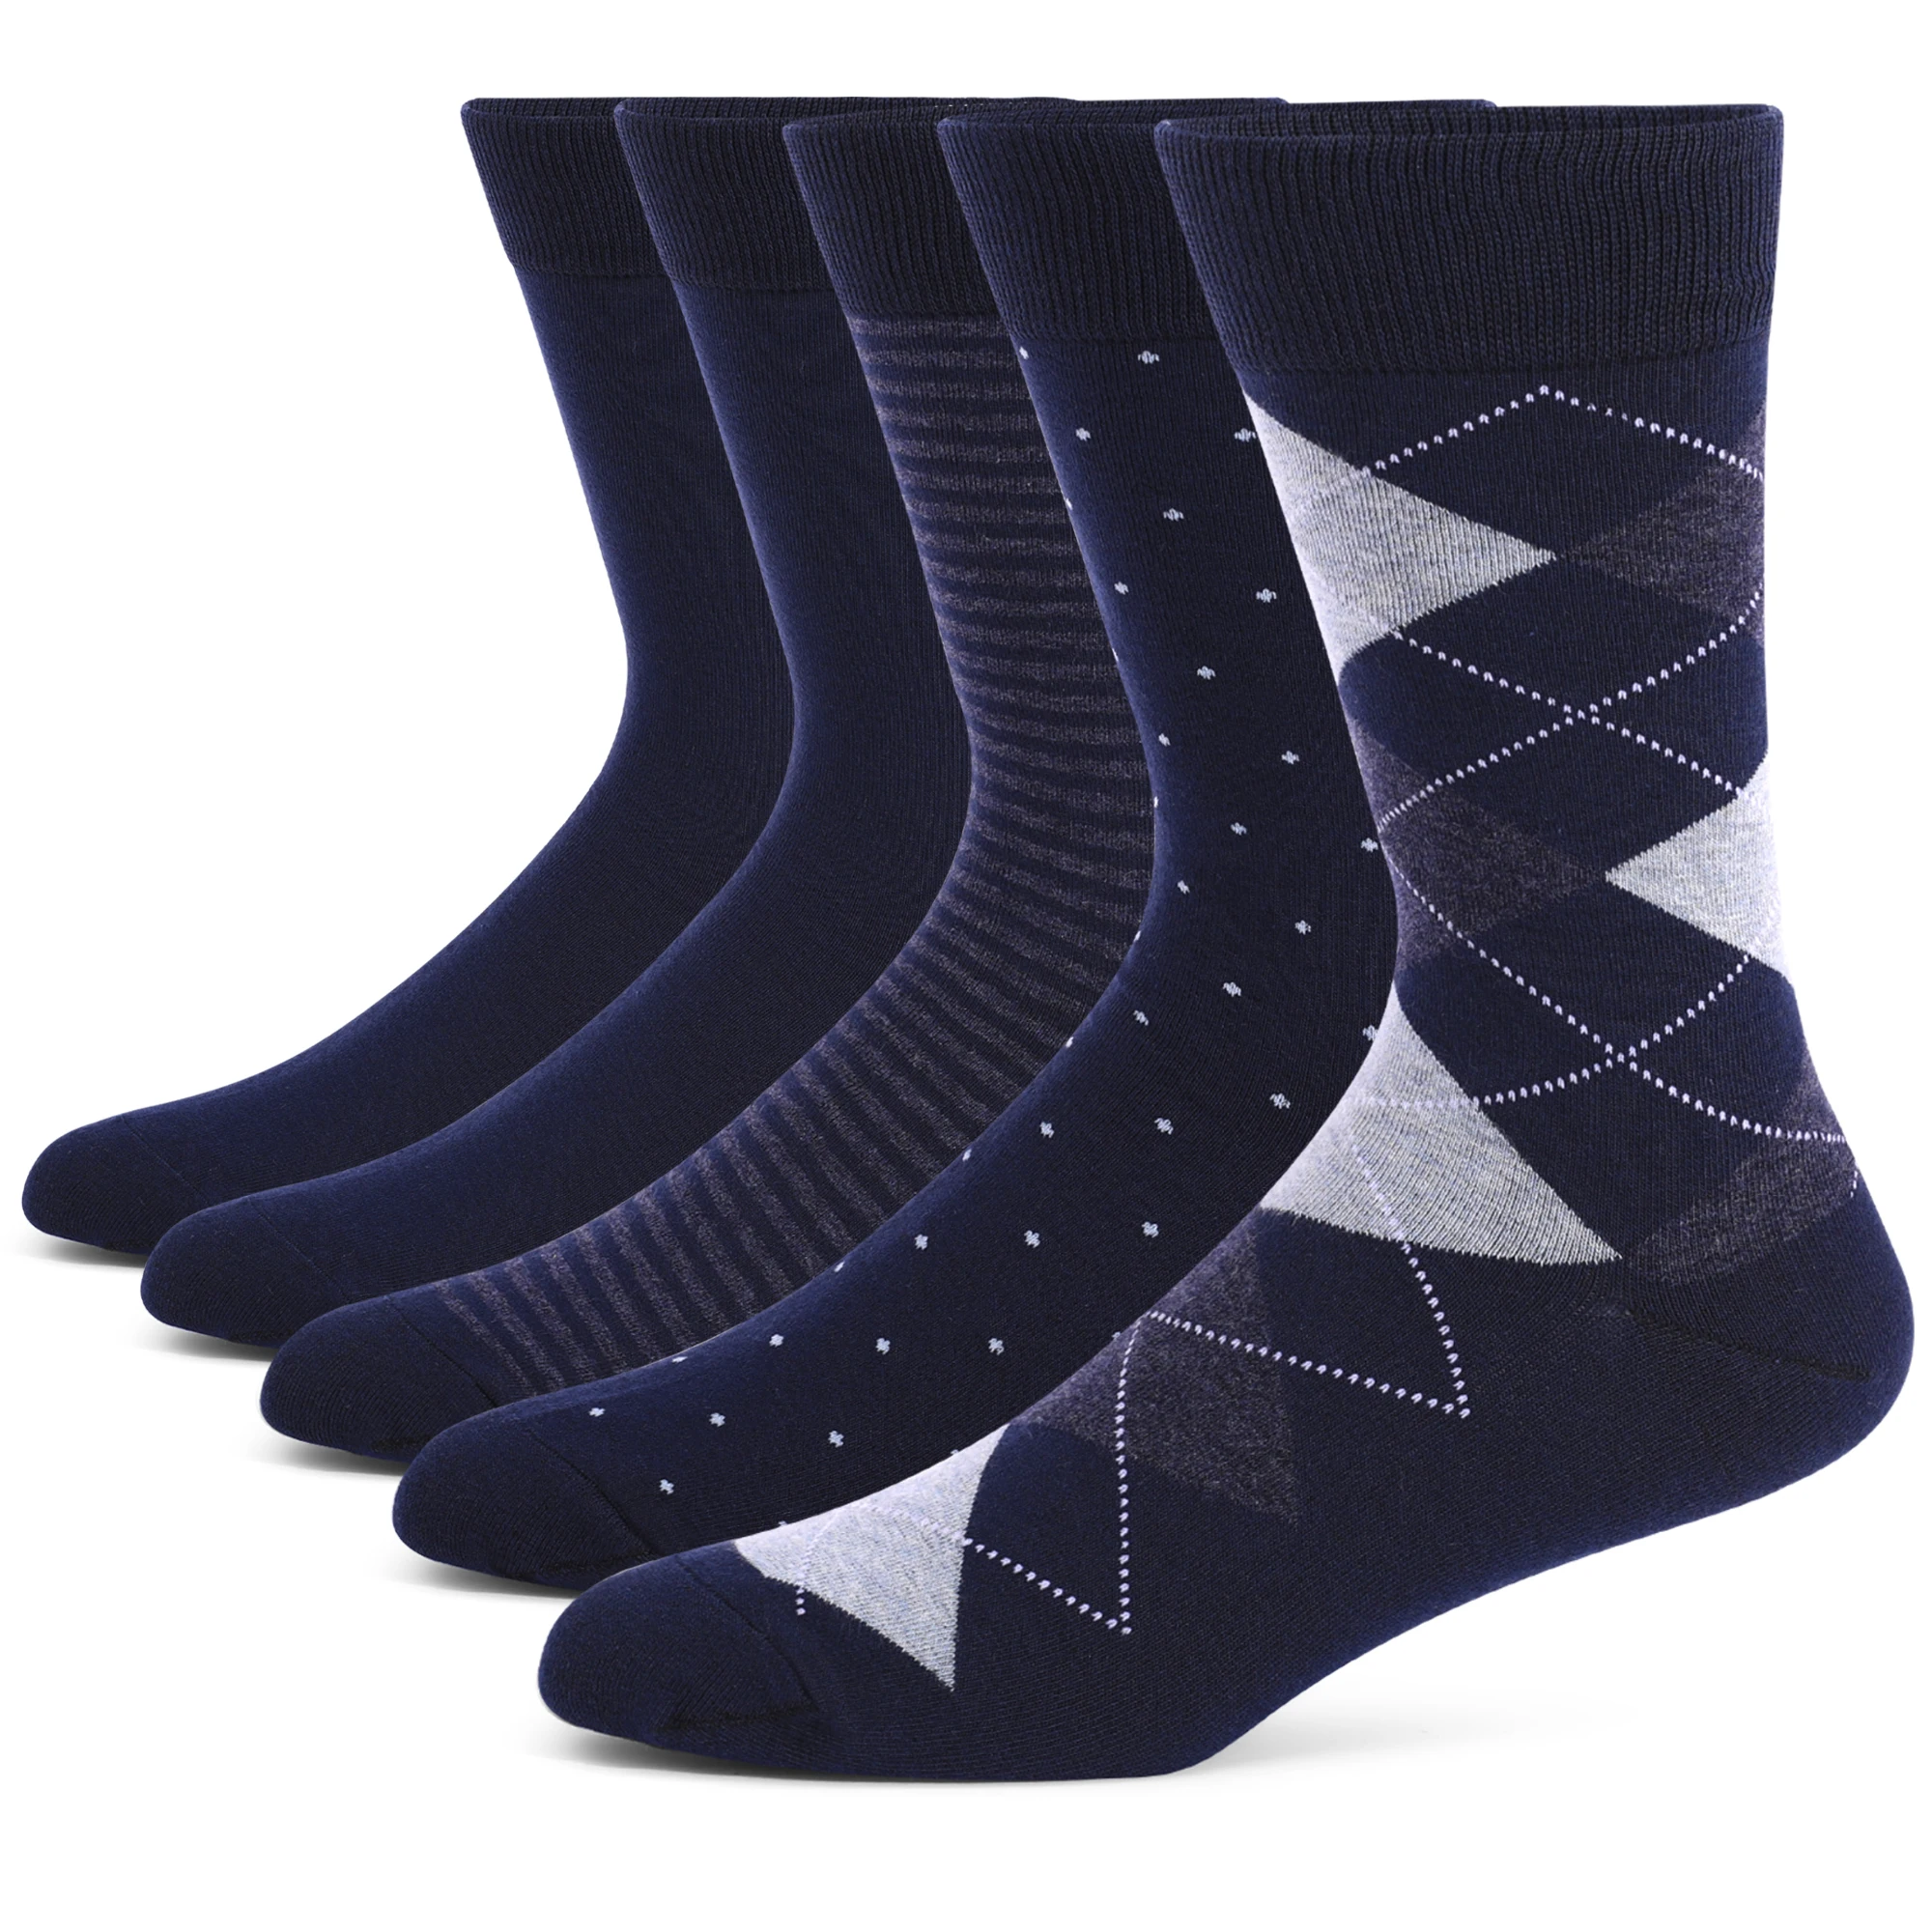 

5 Pairs Mens Dress Socks Plus Size，High Quality Combed Cotton Crew Socks，Black Cool Argyle Breathable Casual Socks for men